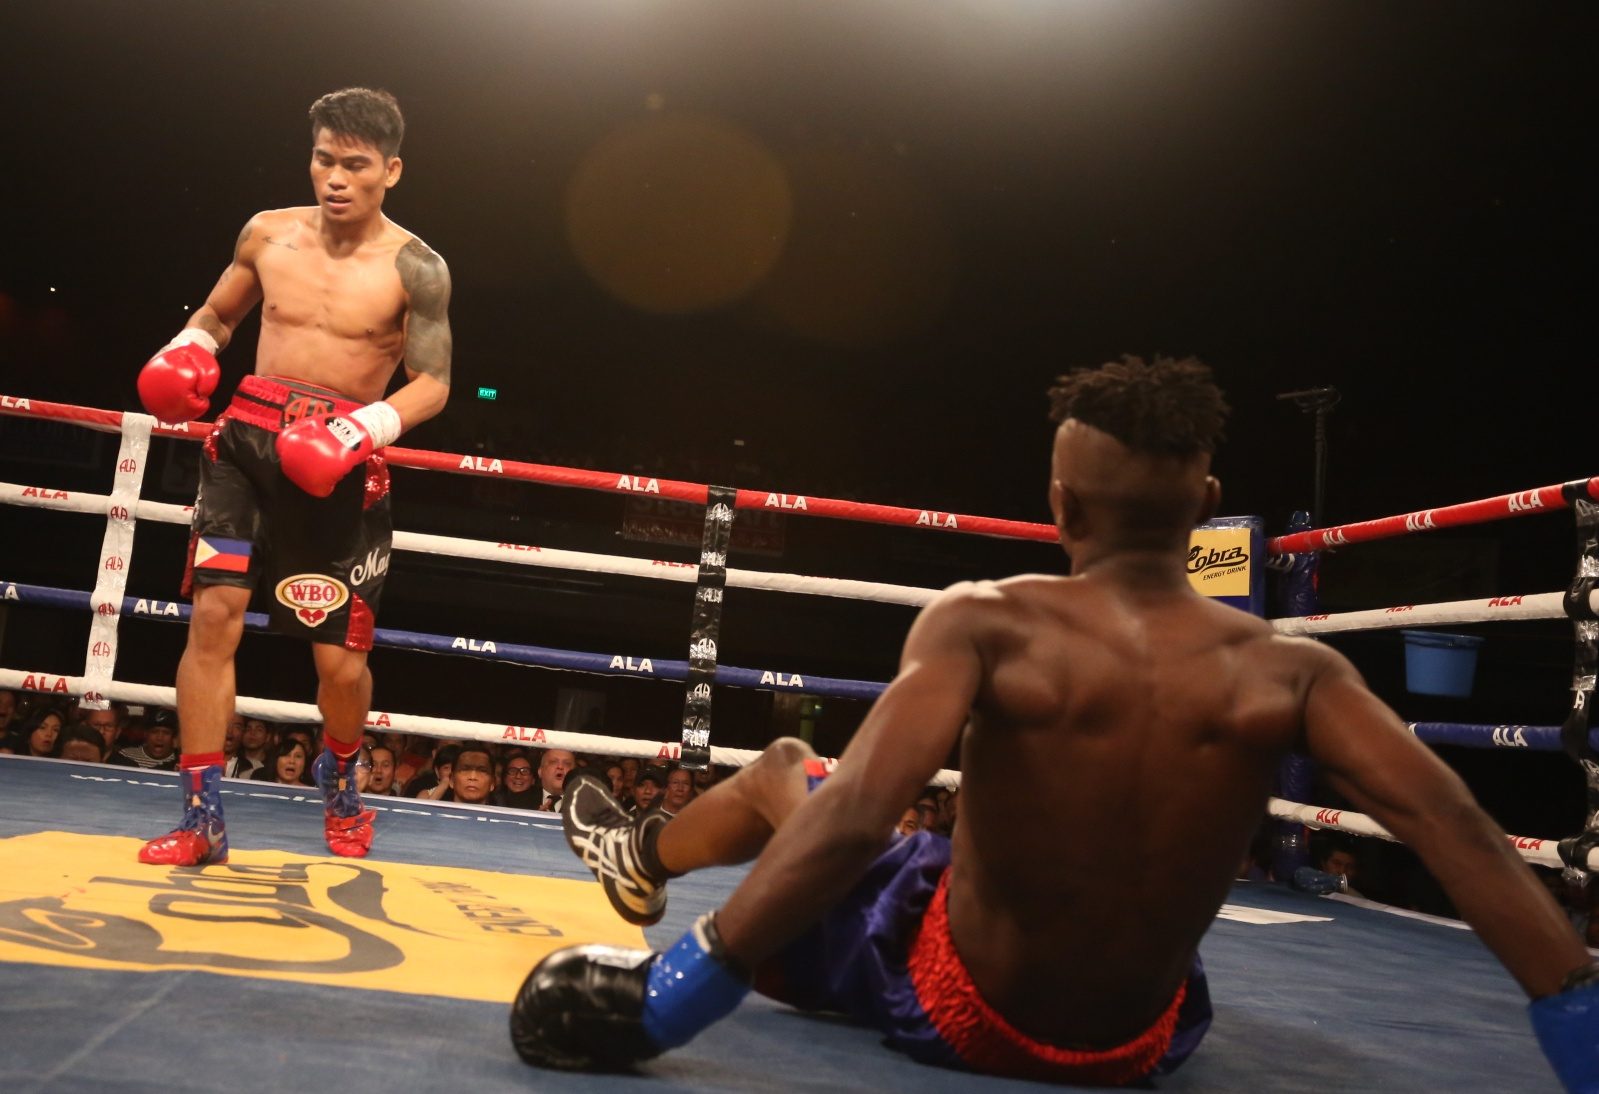 Mark Magsayo scored two knockdowns in the first round to win by technical knockout. Photo by Darryl Mangubat/Rappler 